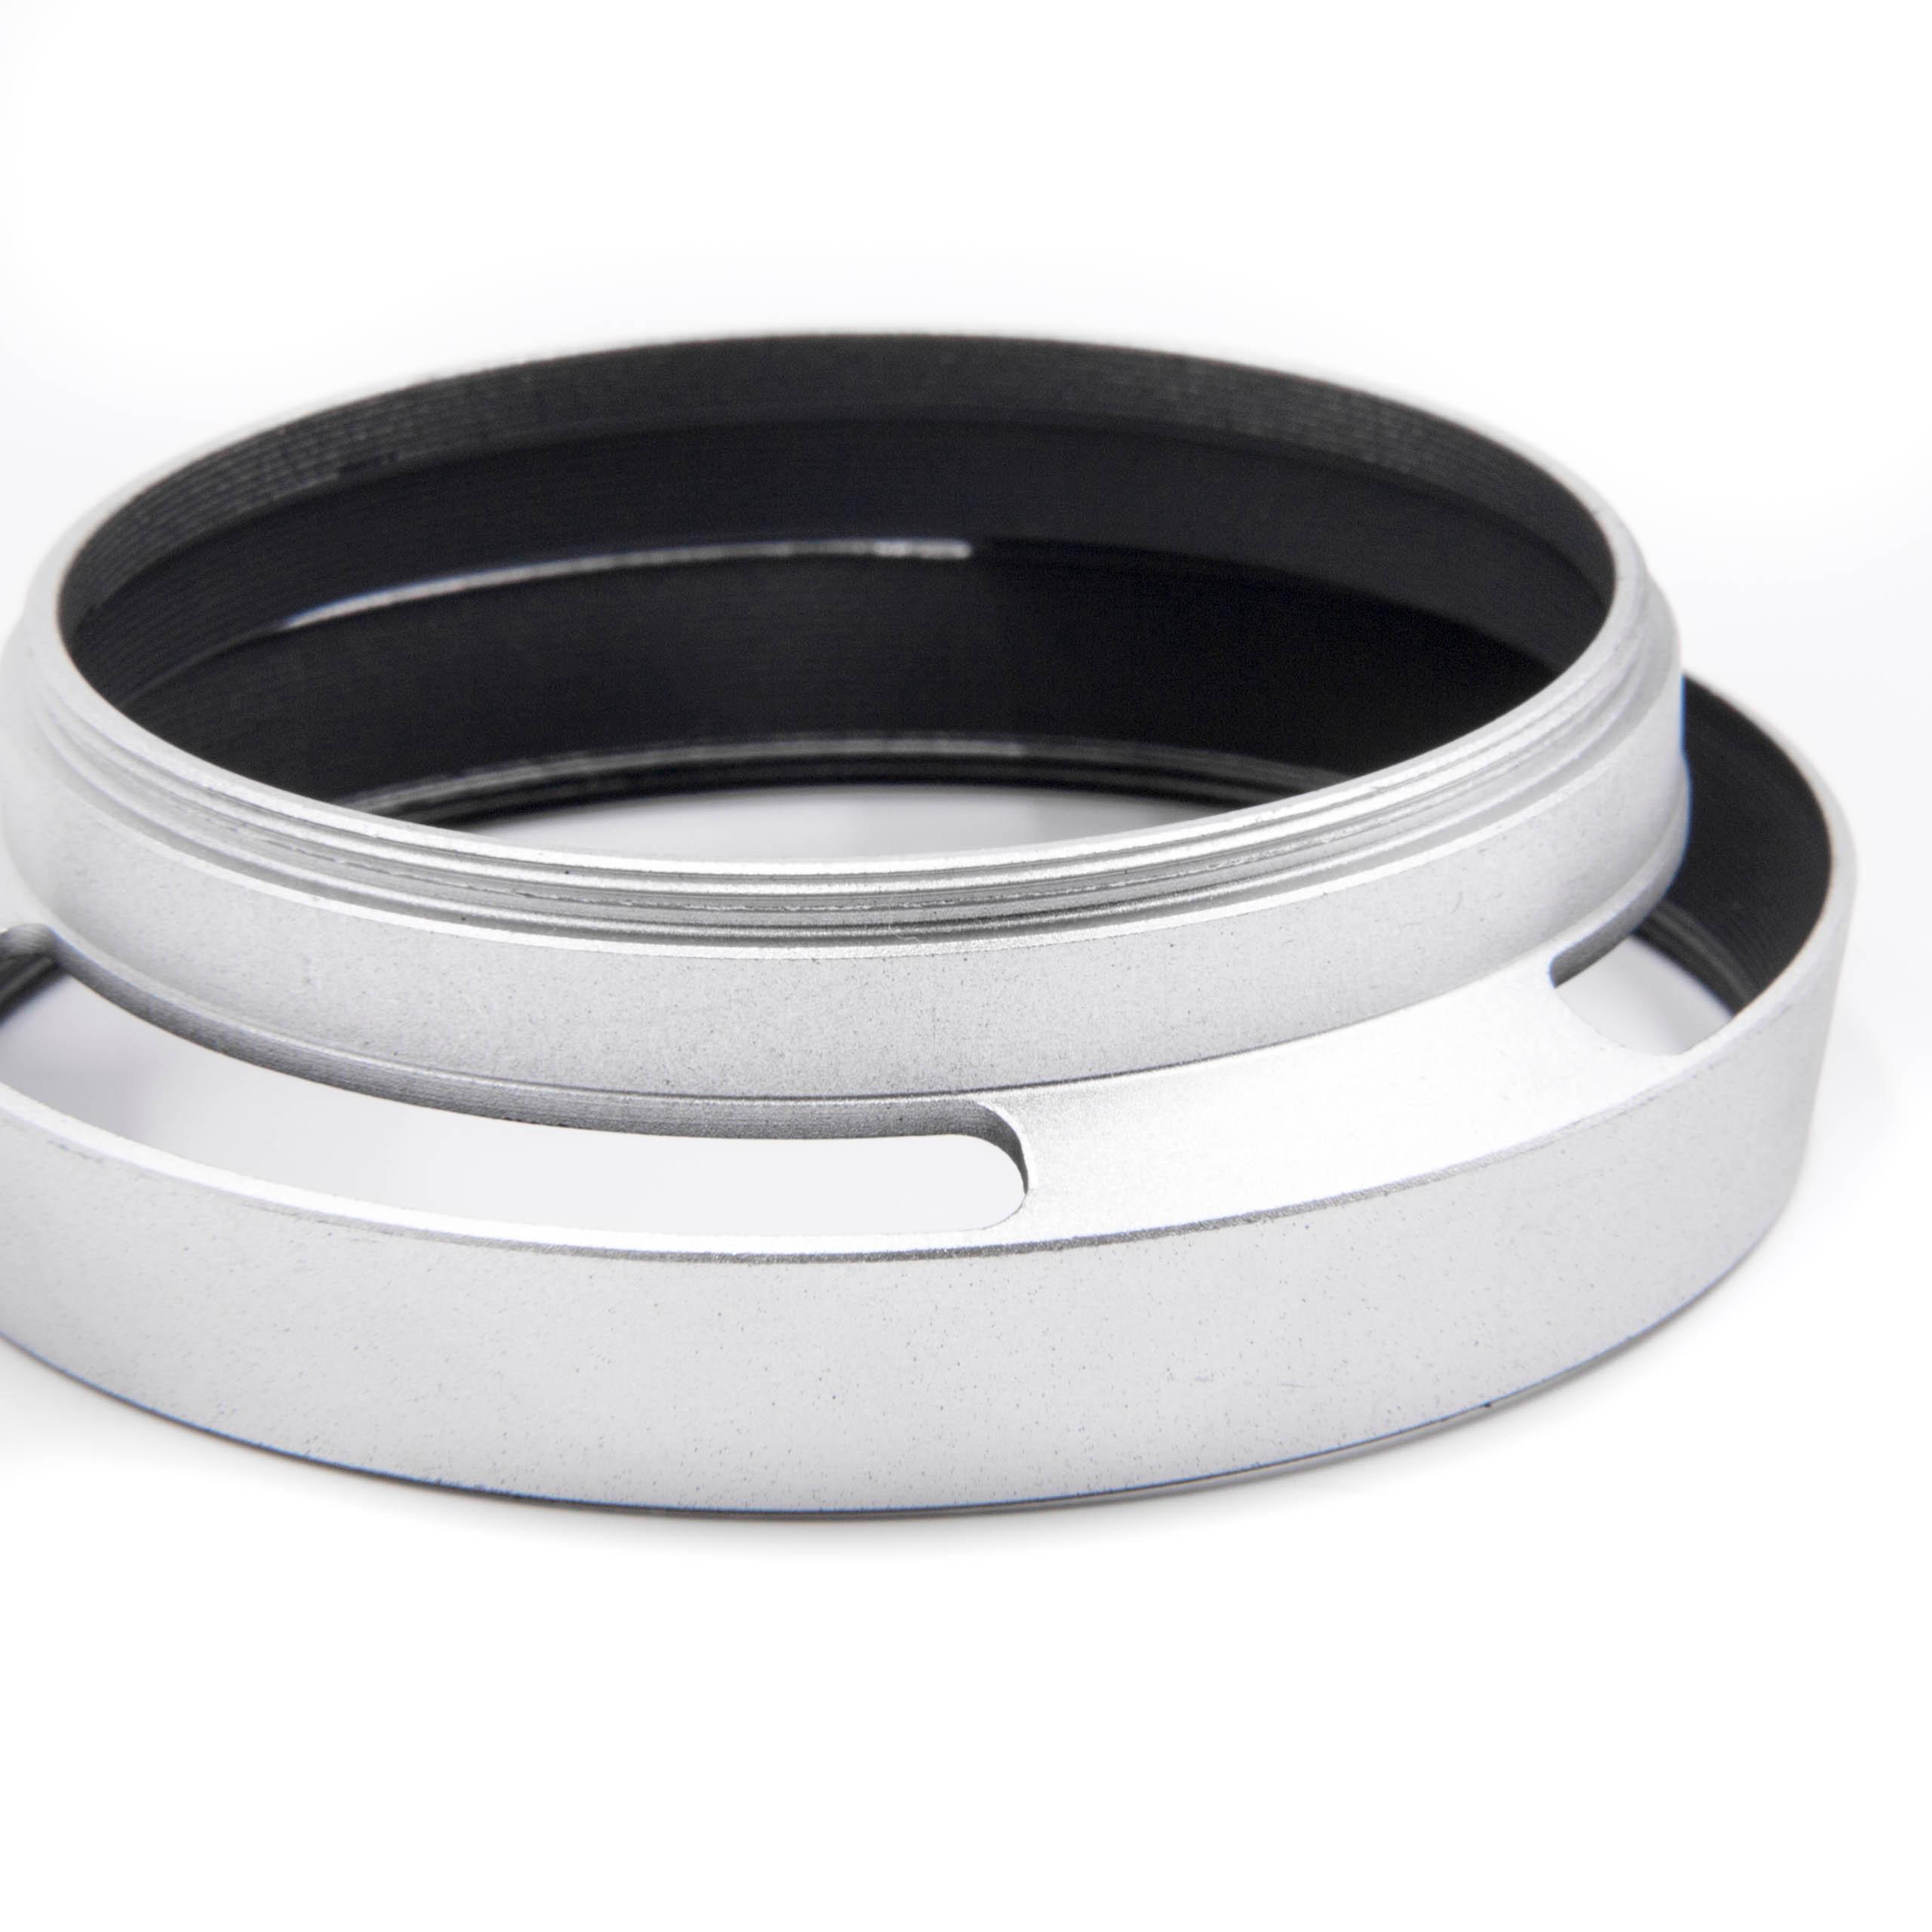 Lens Hood suitable for 58mm Lens - Lens Shade Silver, Round